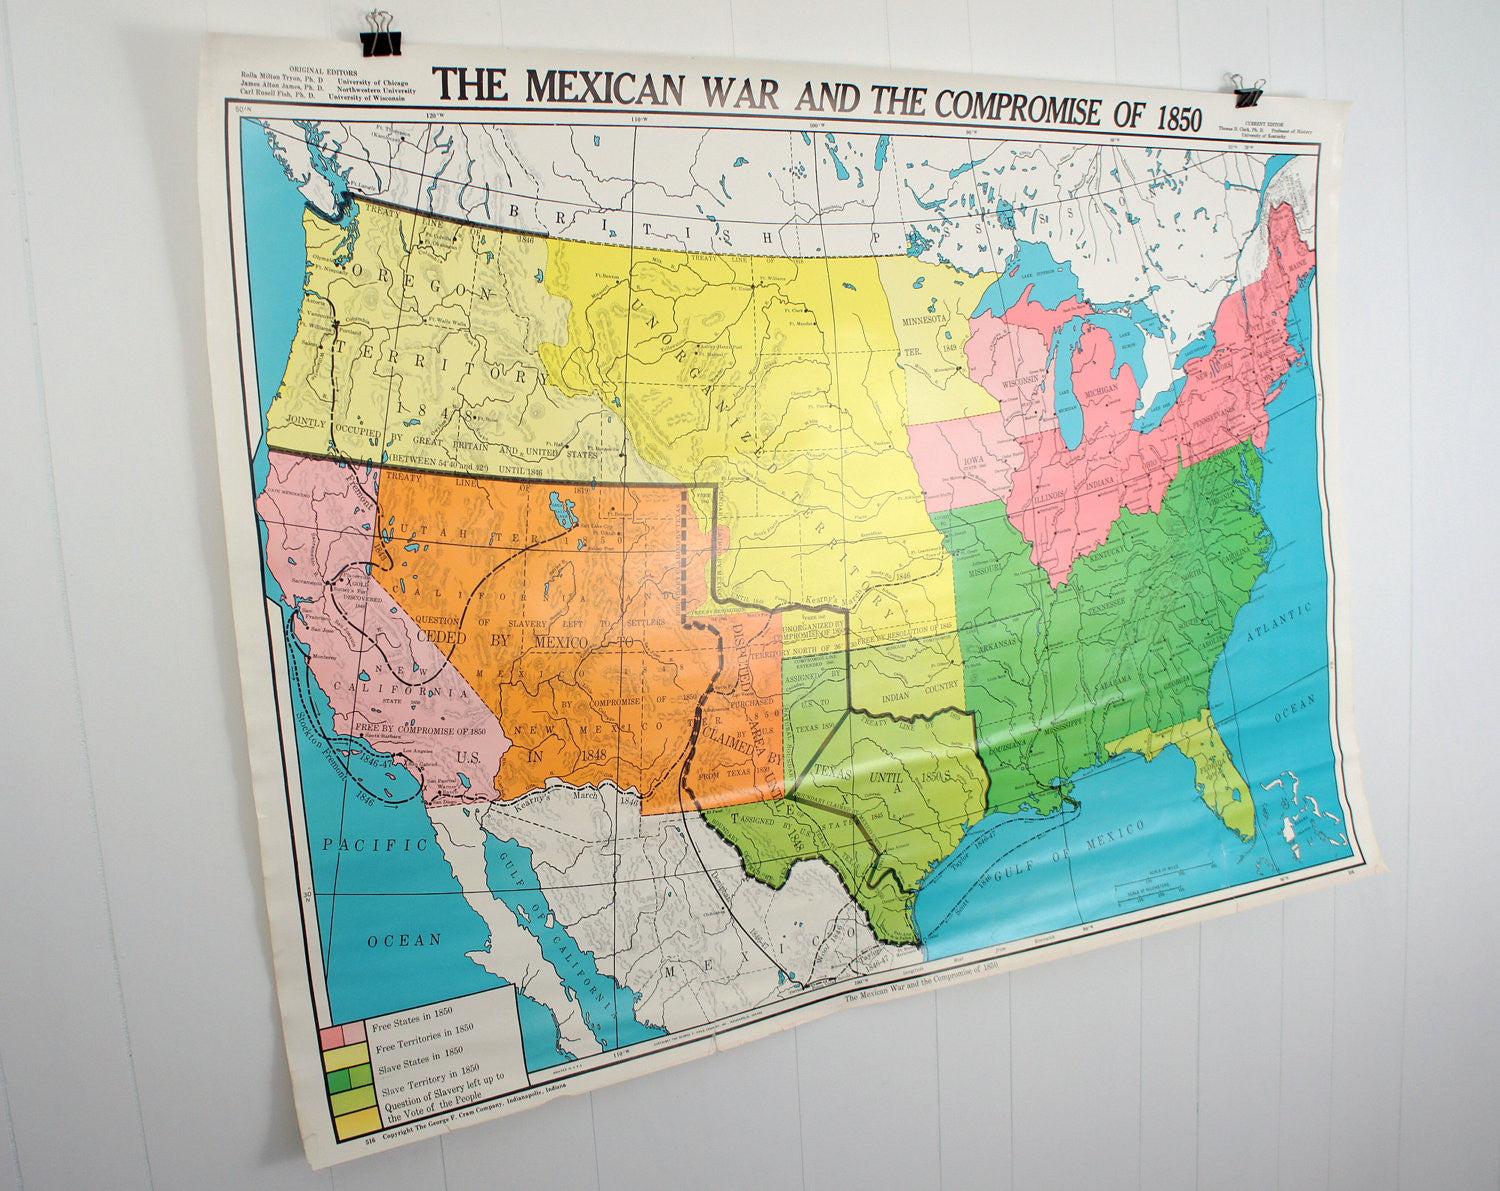 U.S. History Wall Map - Mexican War & Compromise of 1850